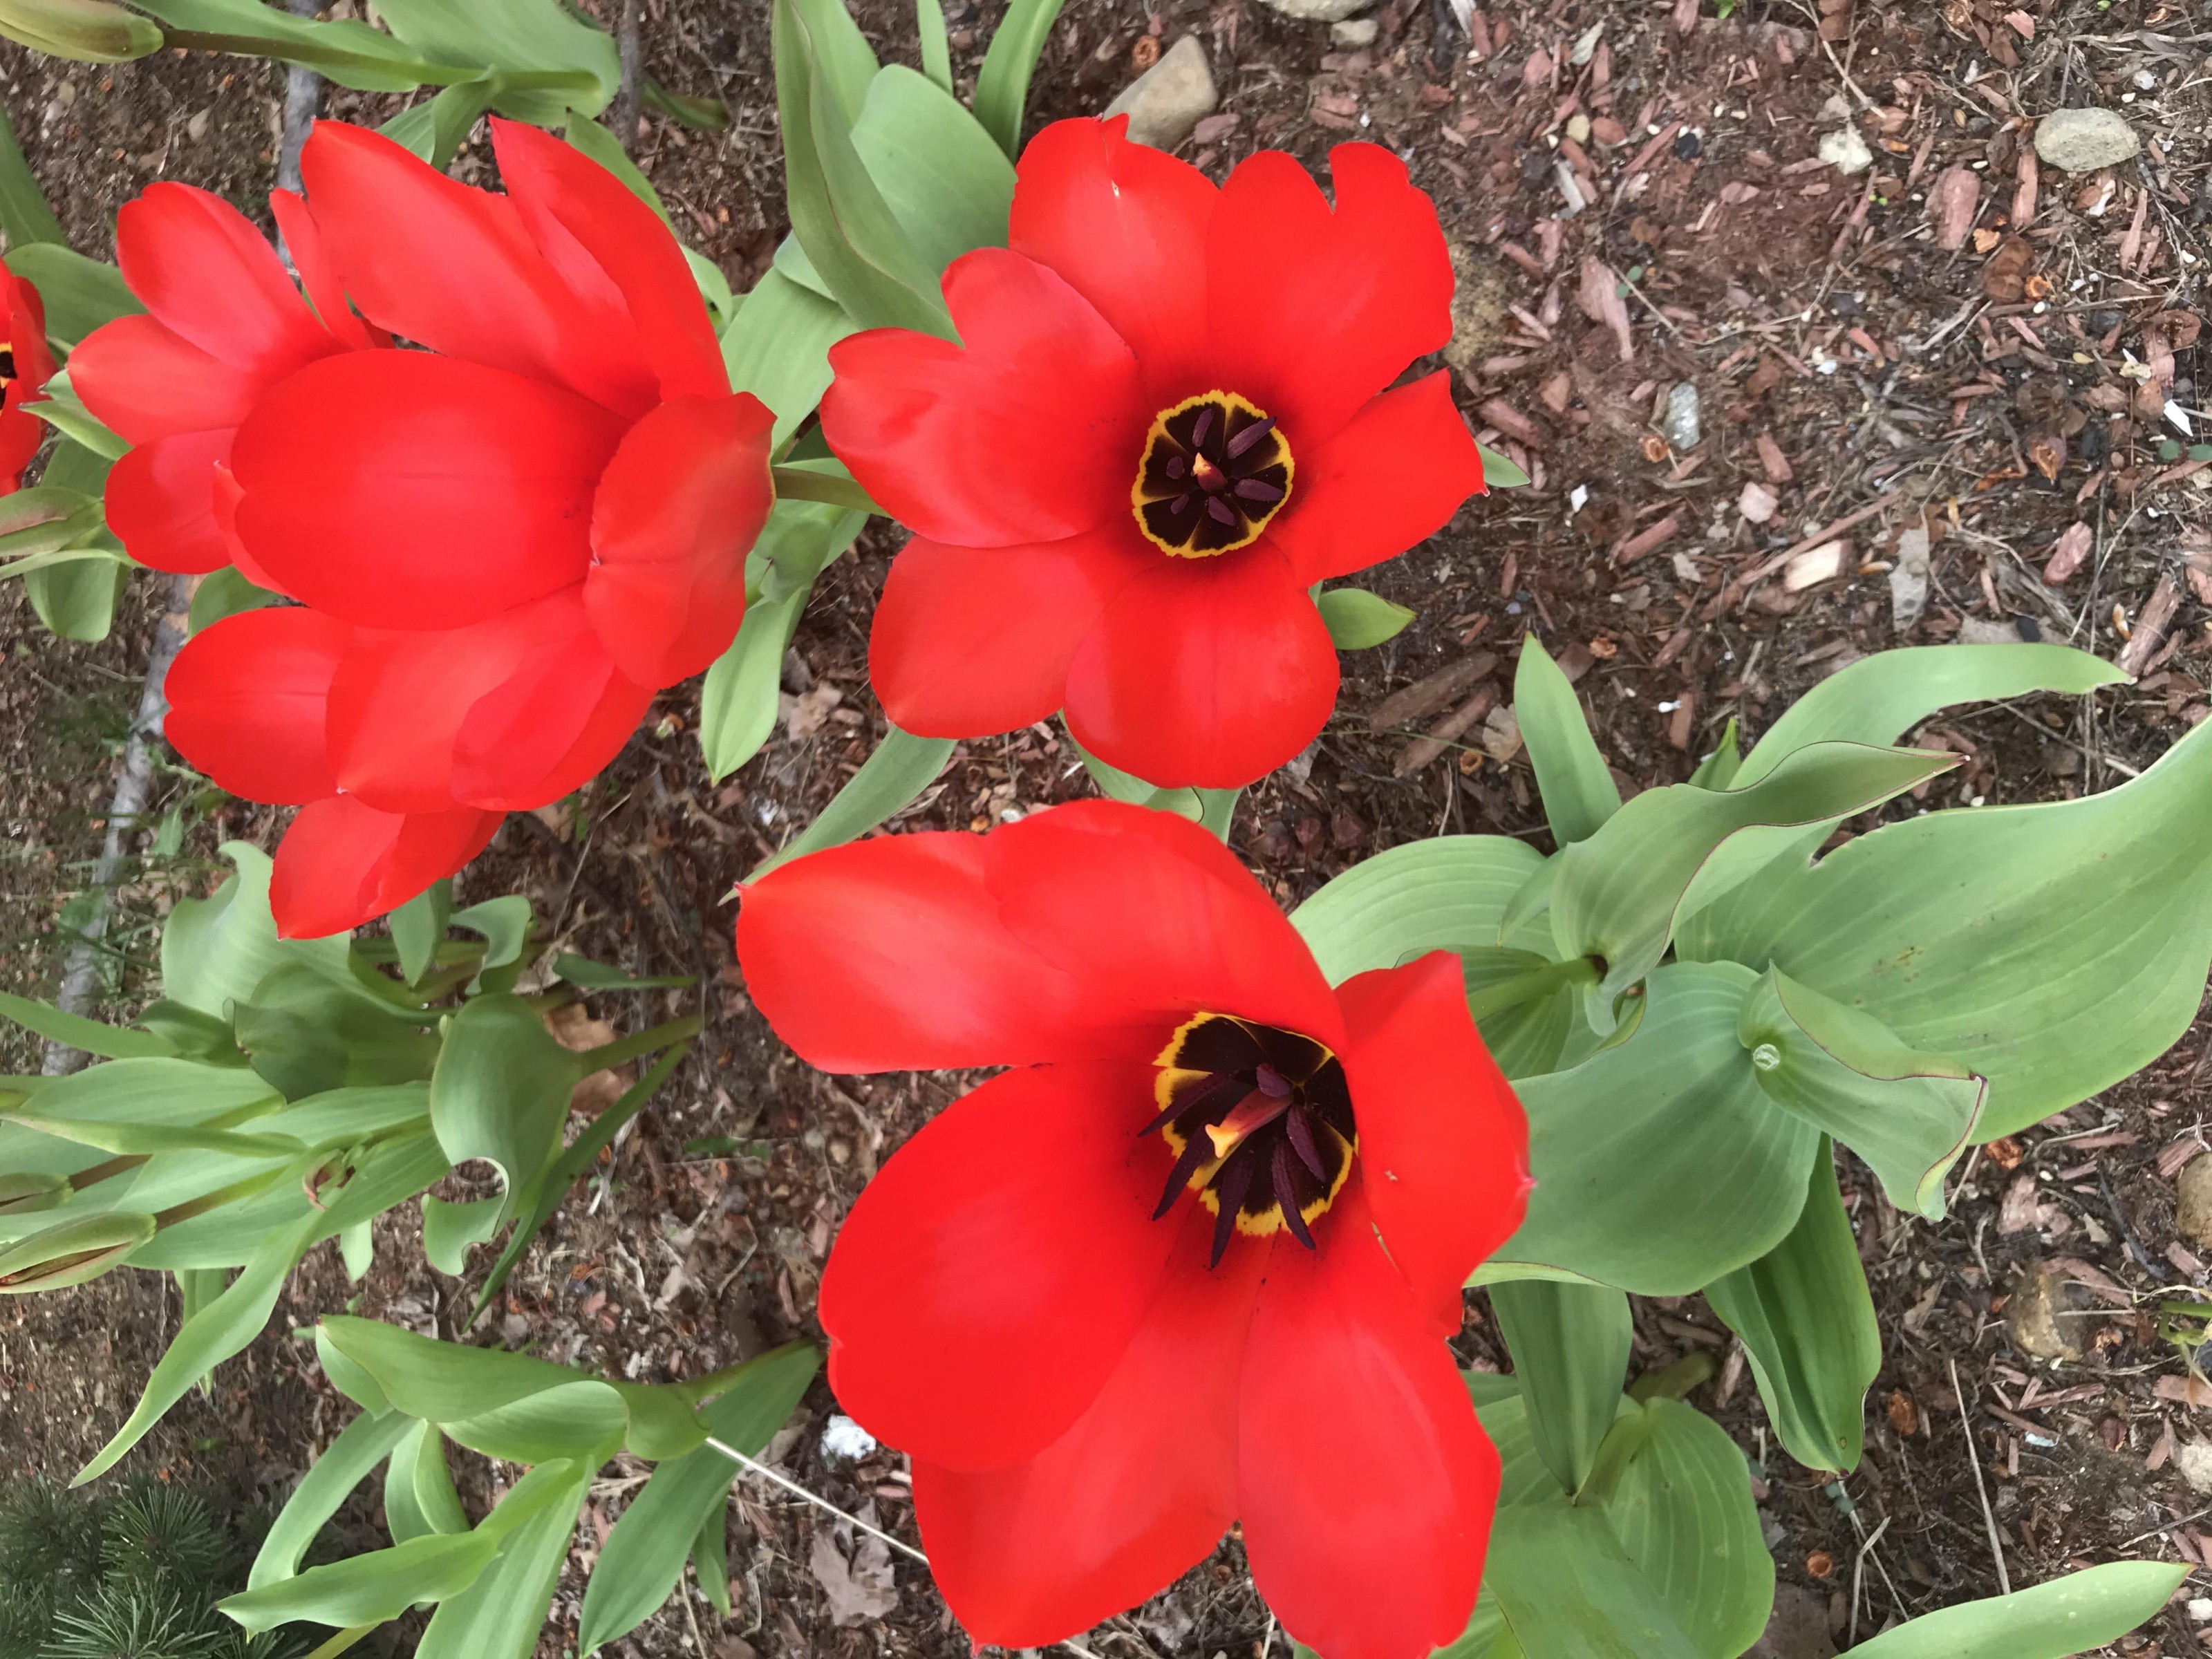 Blooming tulips in New Hampshire.